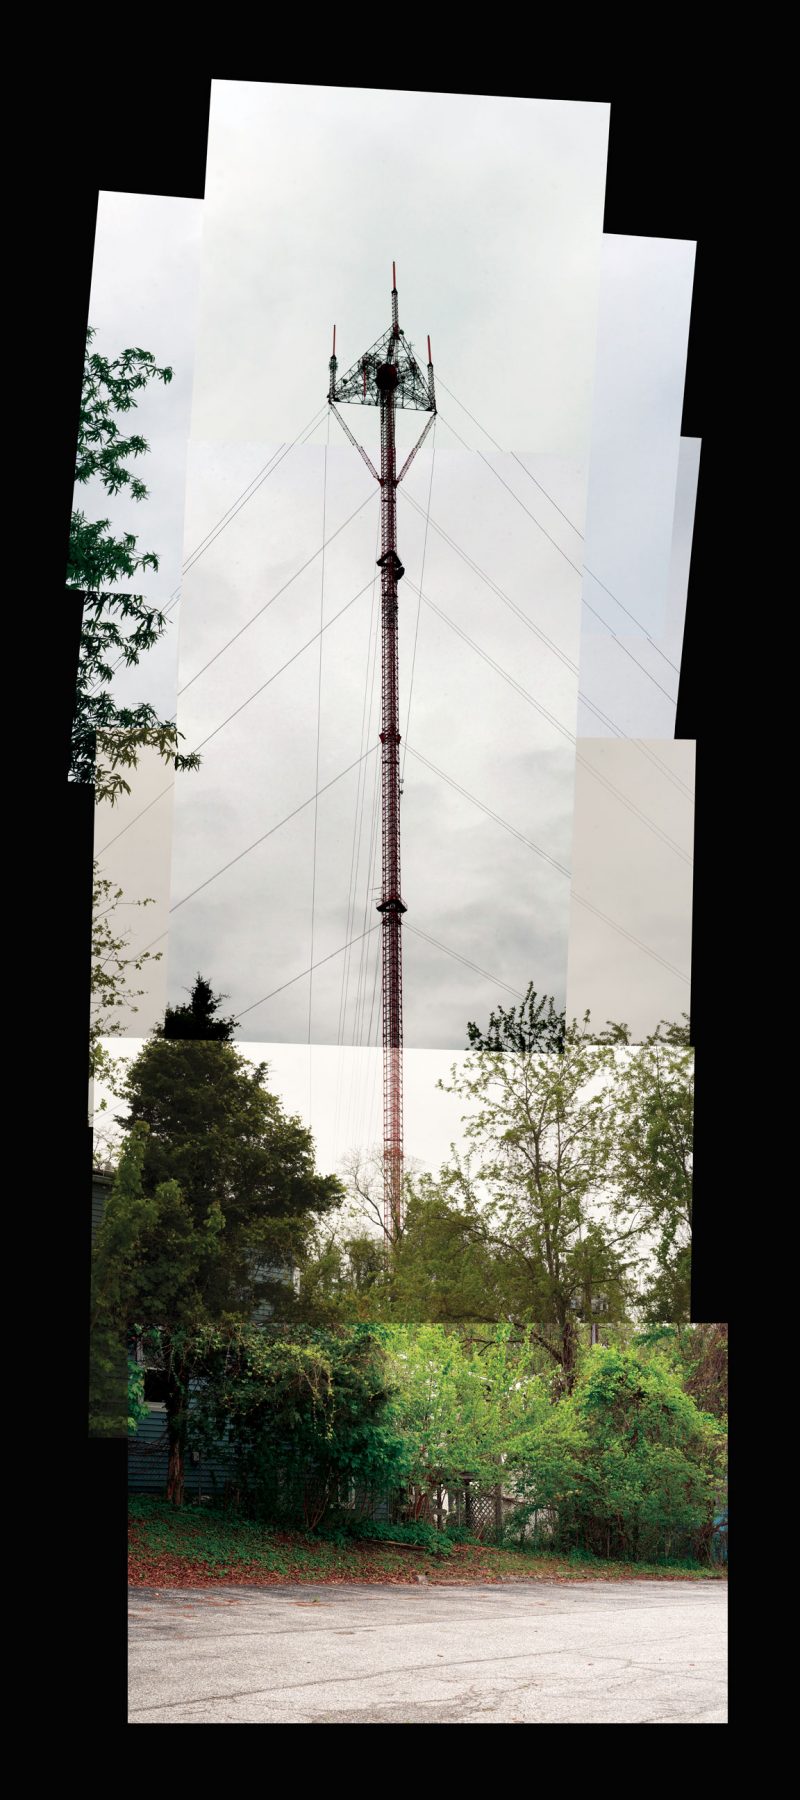 A photomontage of a thin tower against a cloudy sky, surrounded by foliage.